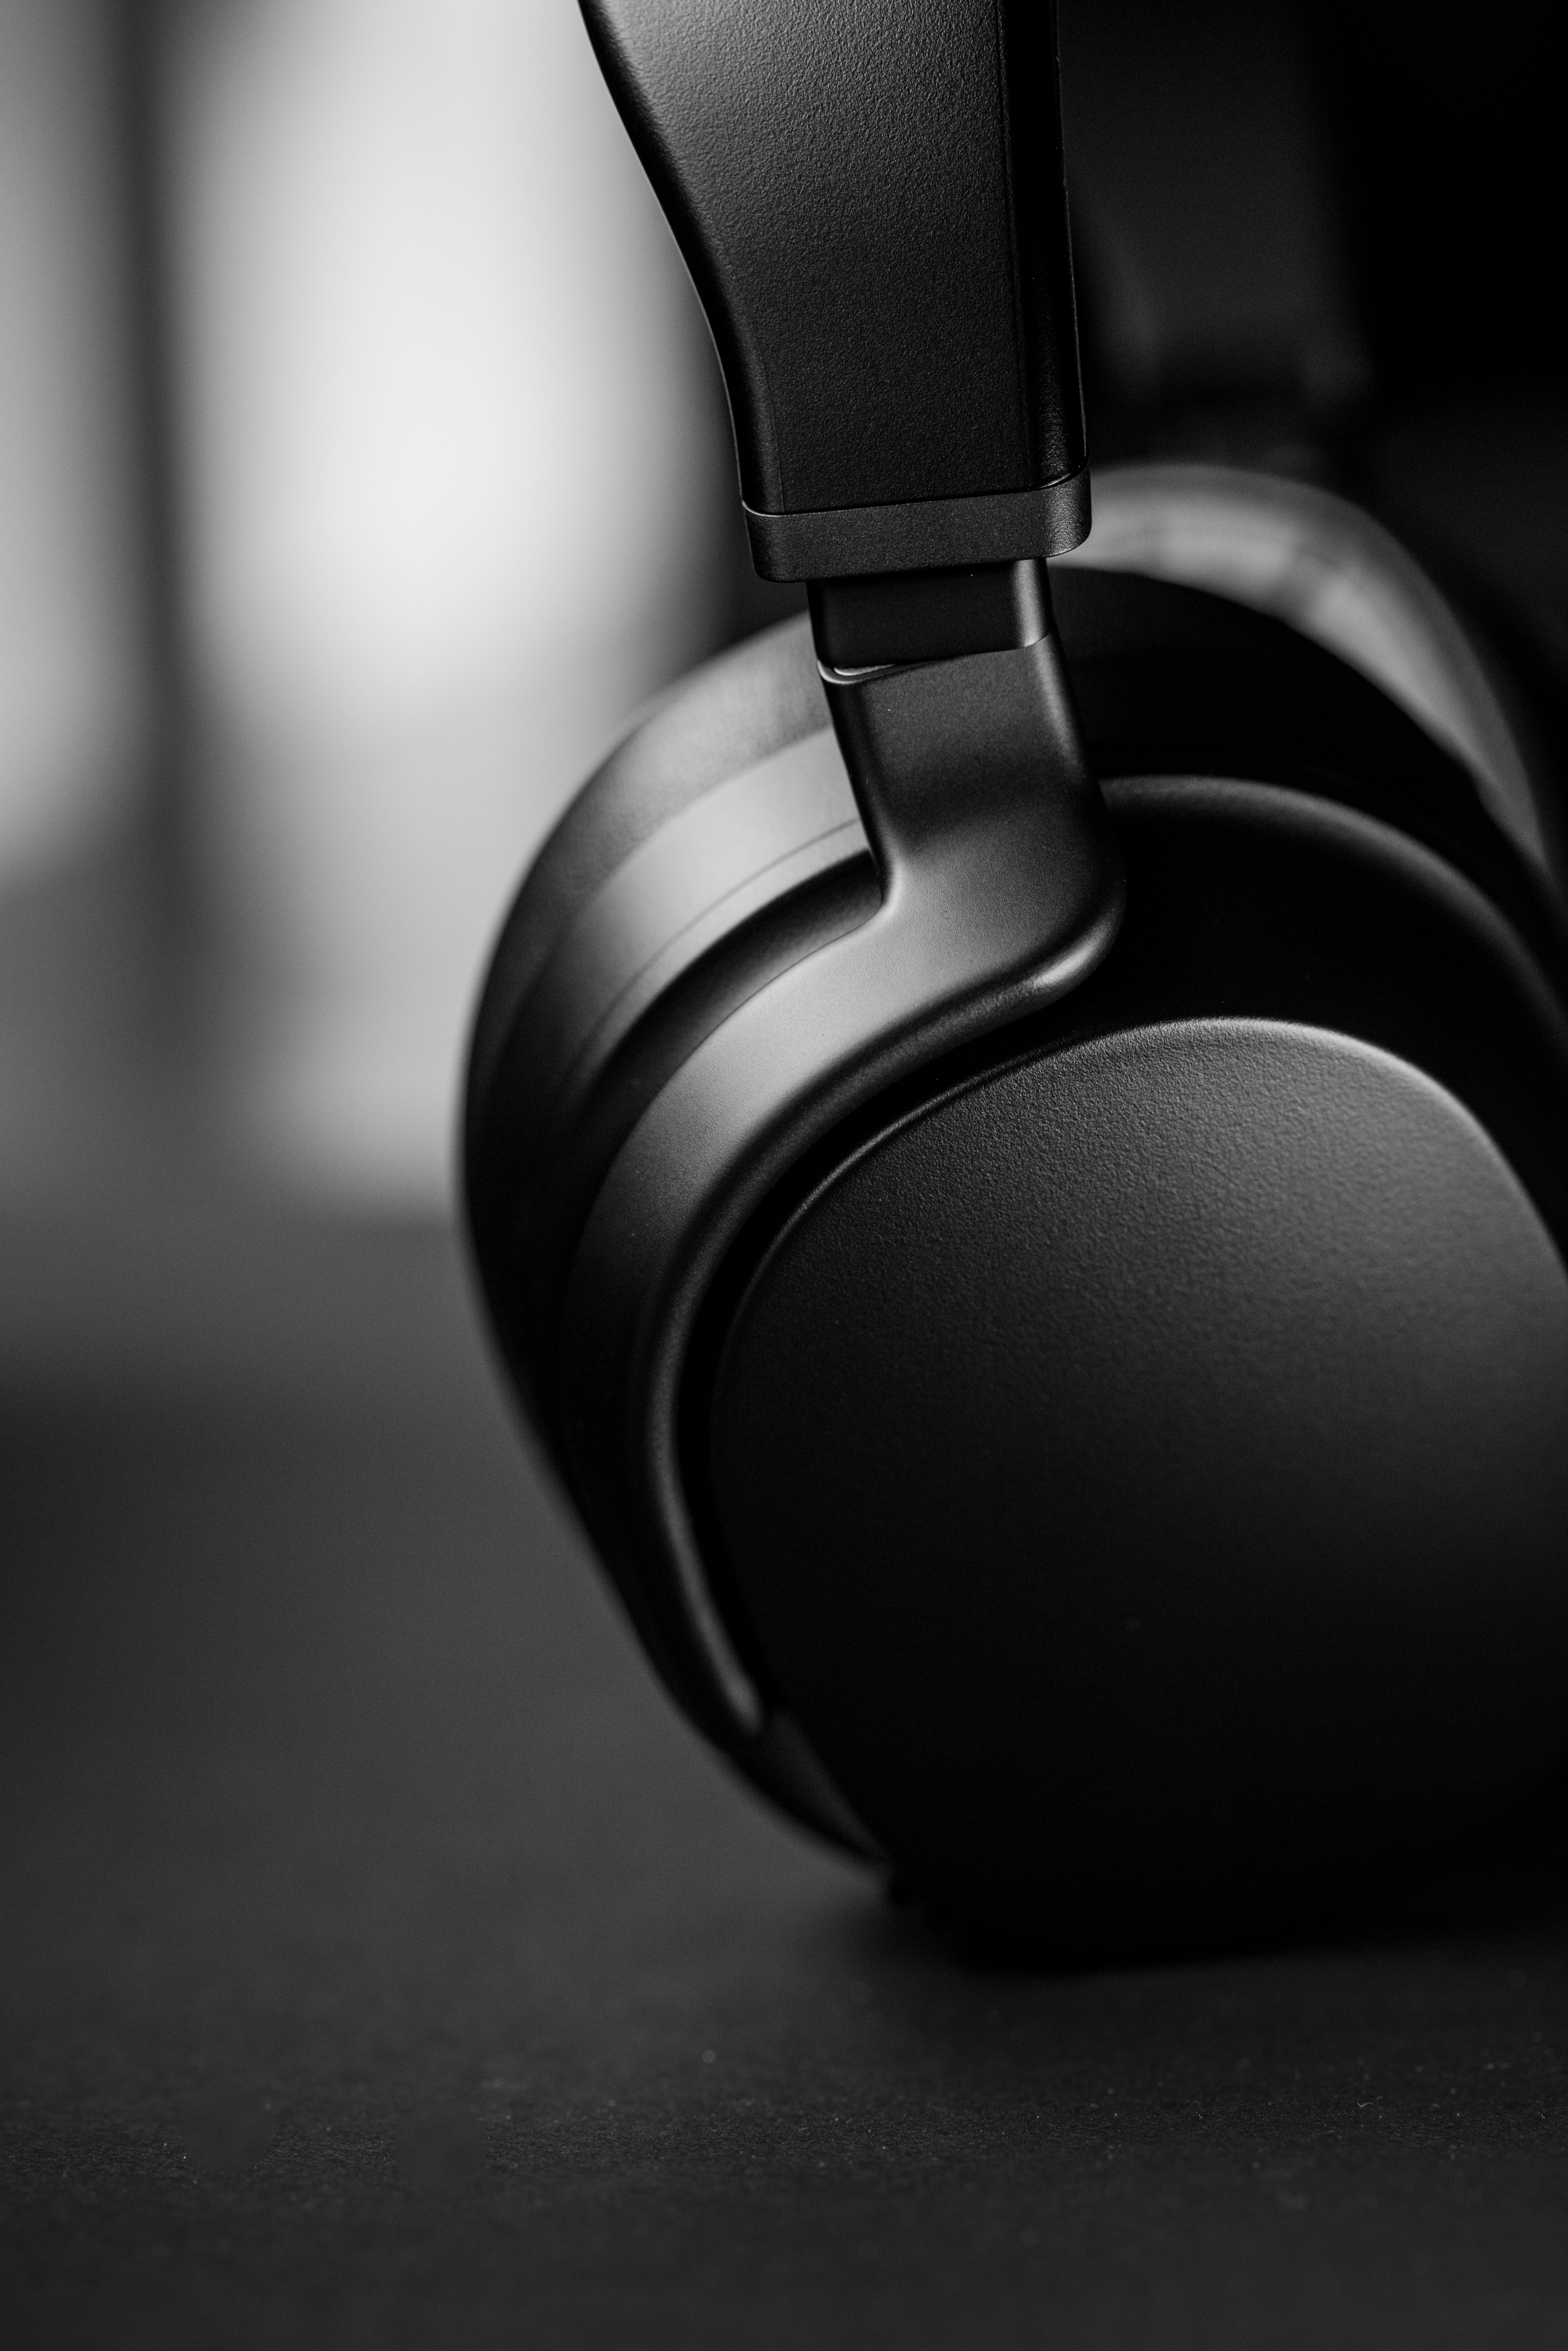 black and gray headphones on black and white surface